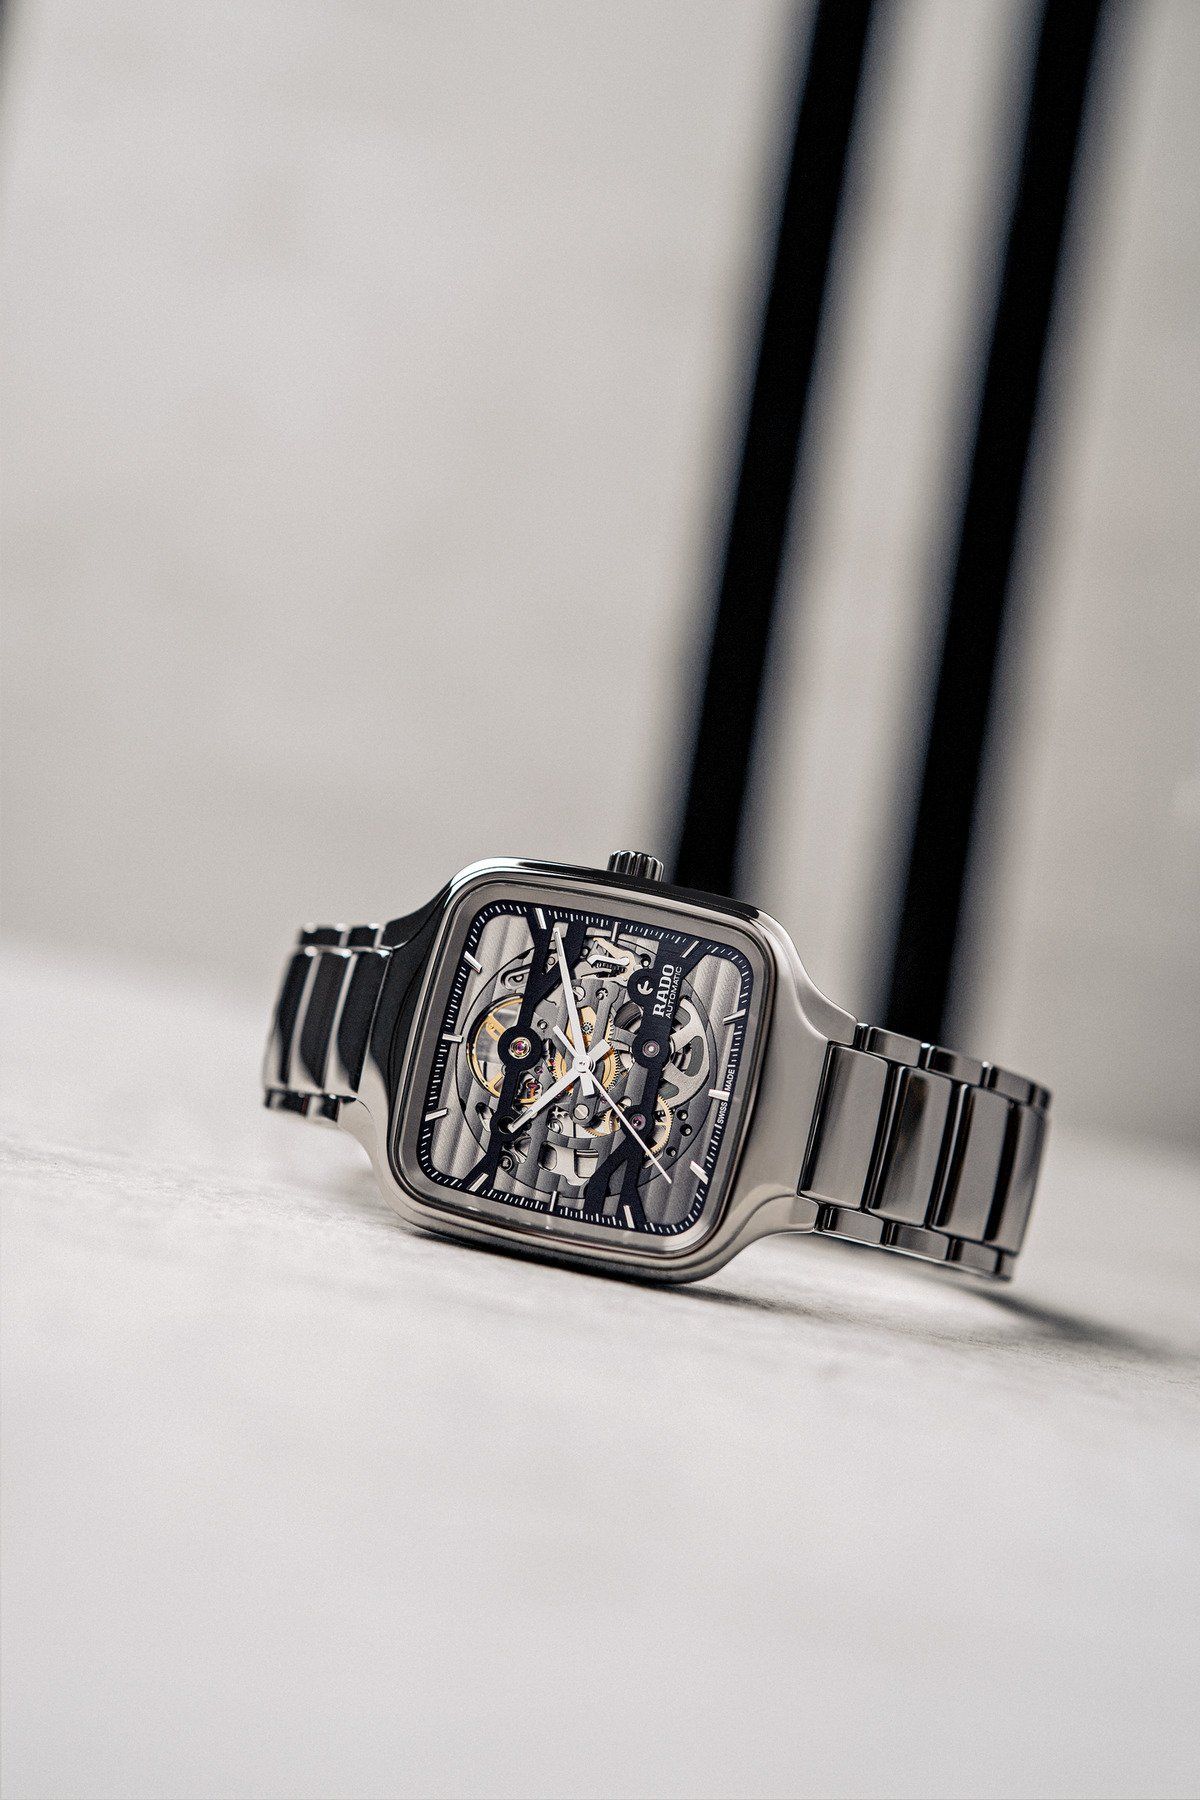 The Rado True Square Skeleton offers an elevated expression of true skeletonisation